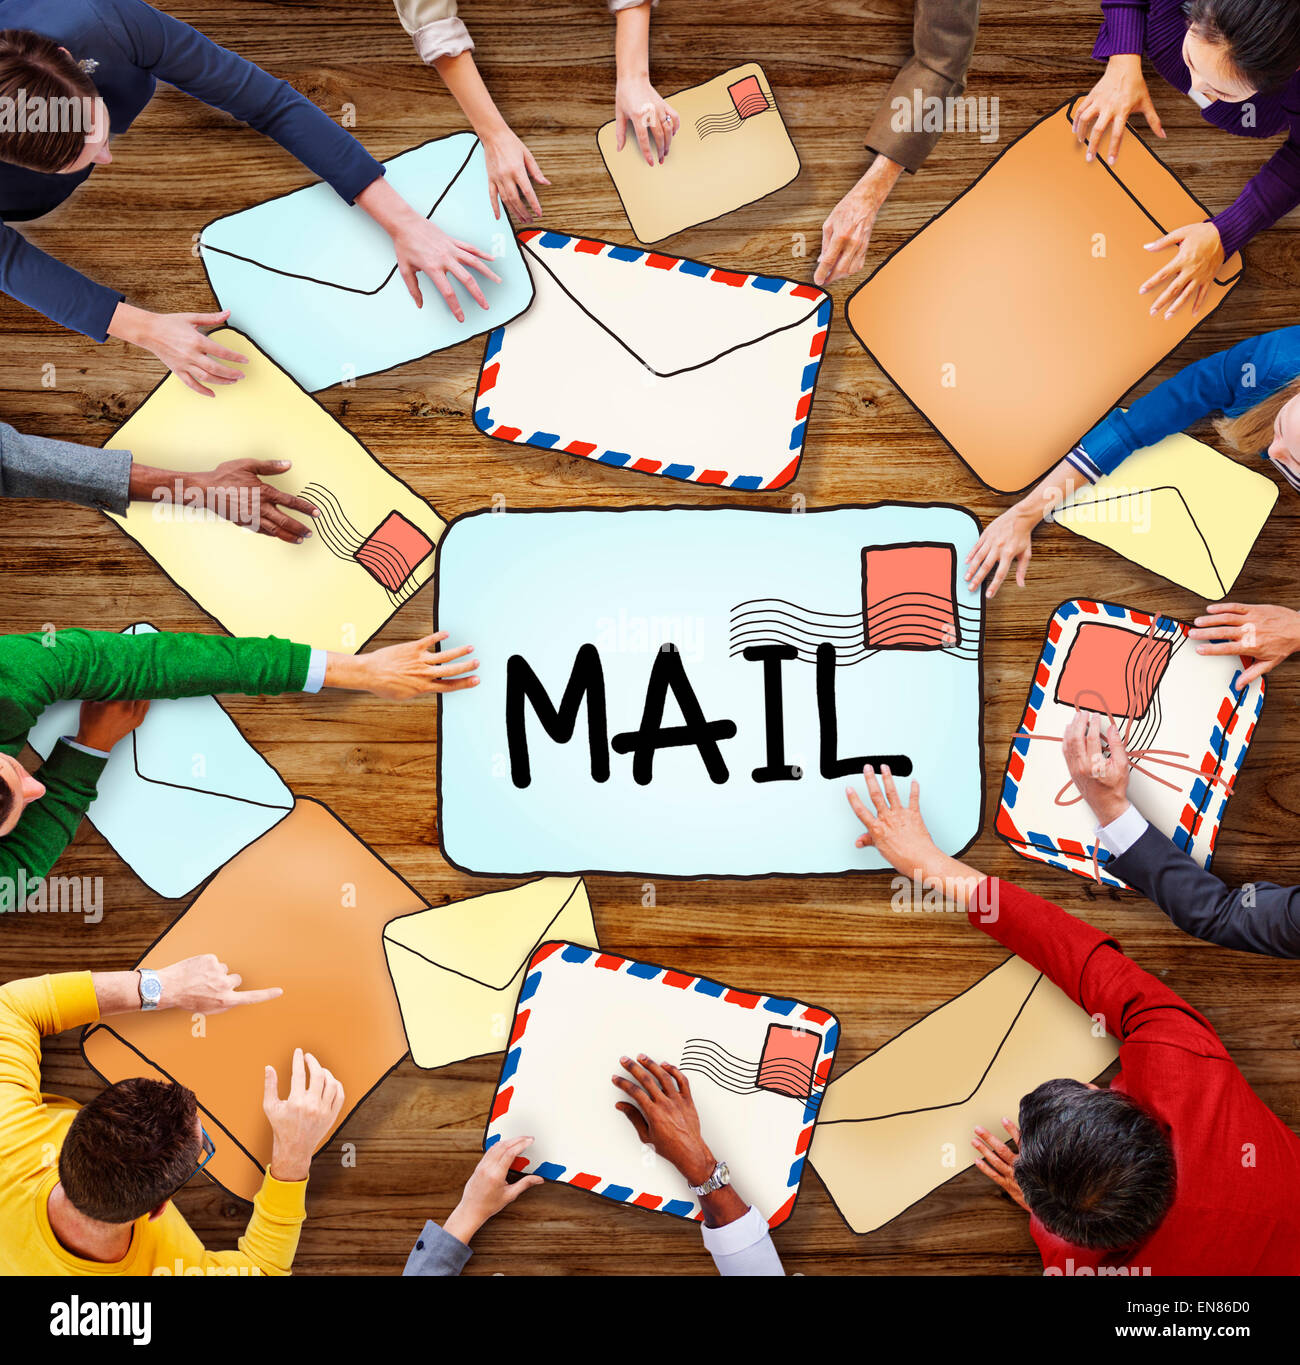 Aerial View of People and E-Mail Concepts Stock Photo